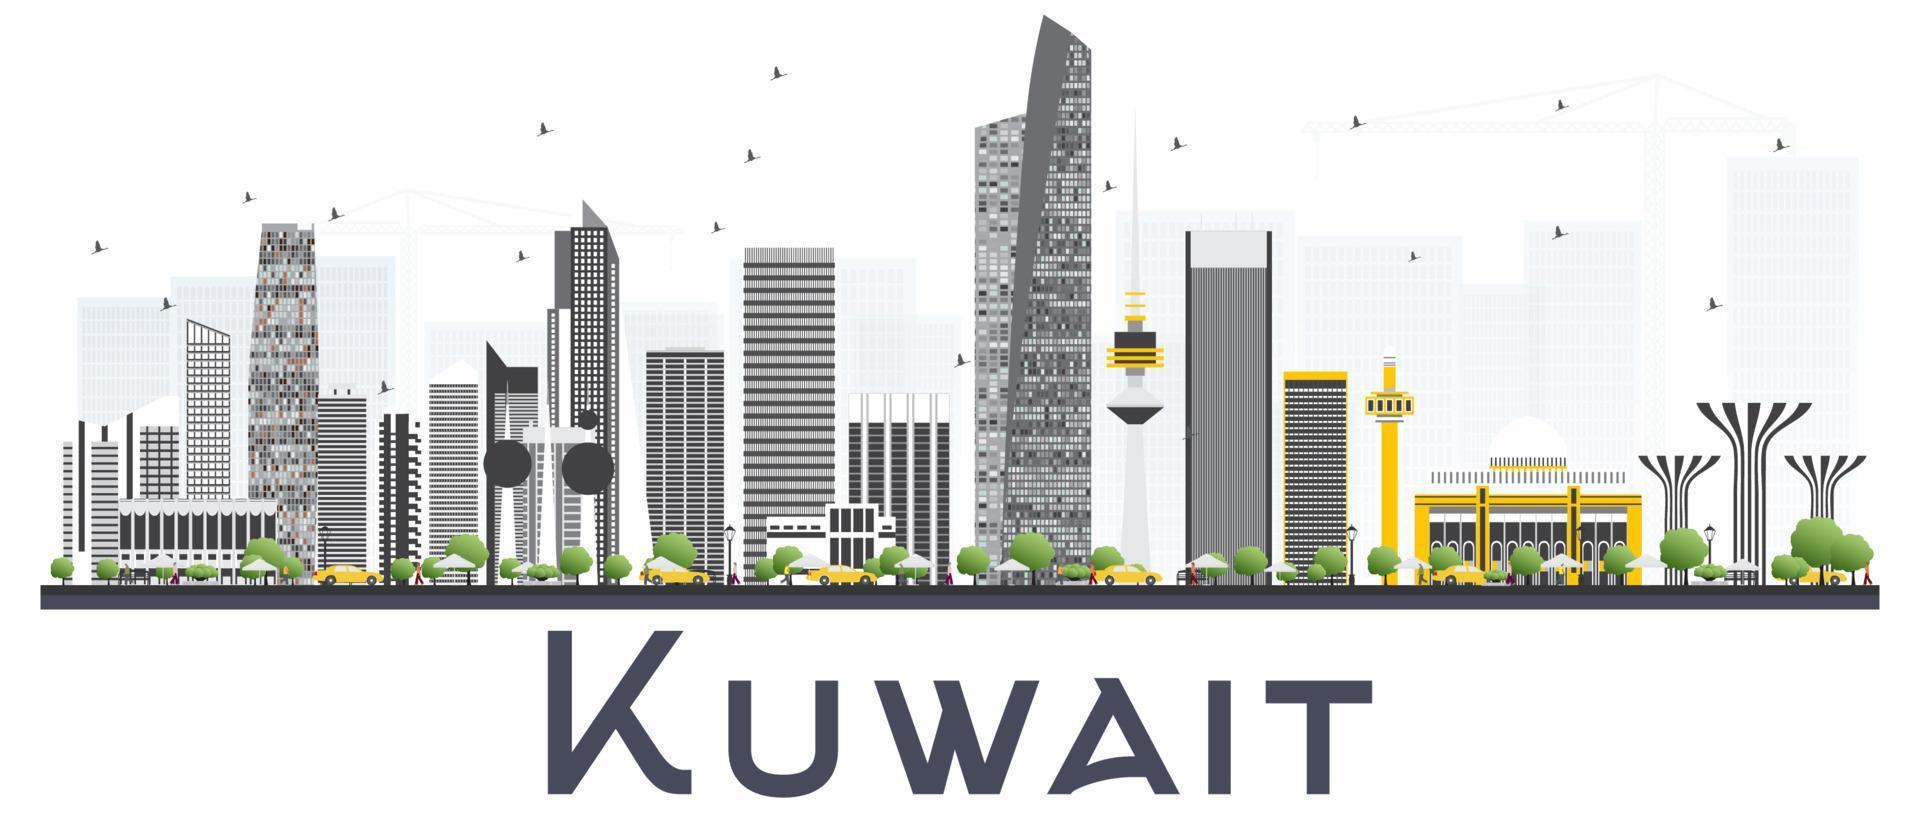 Kuwait City Skyline with Gray Buildings Isolated on White Background. vector